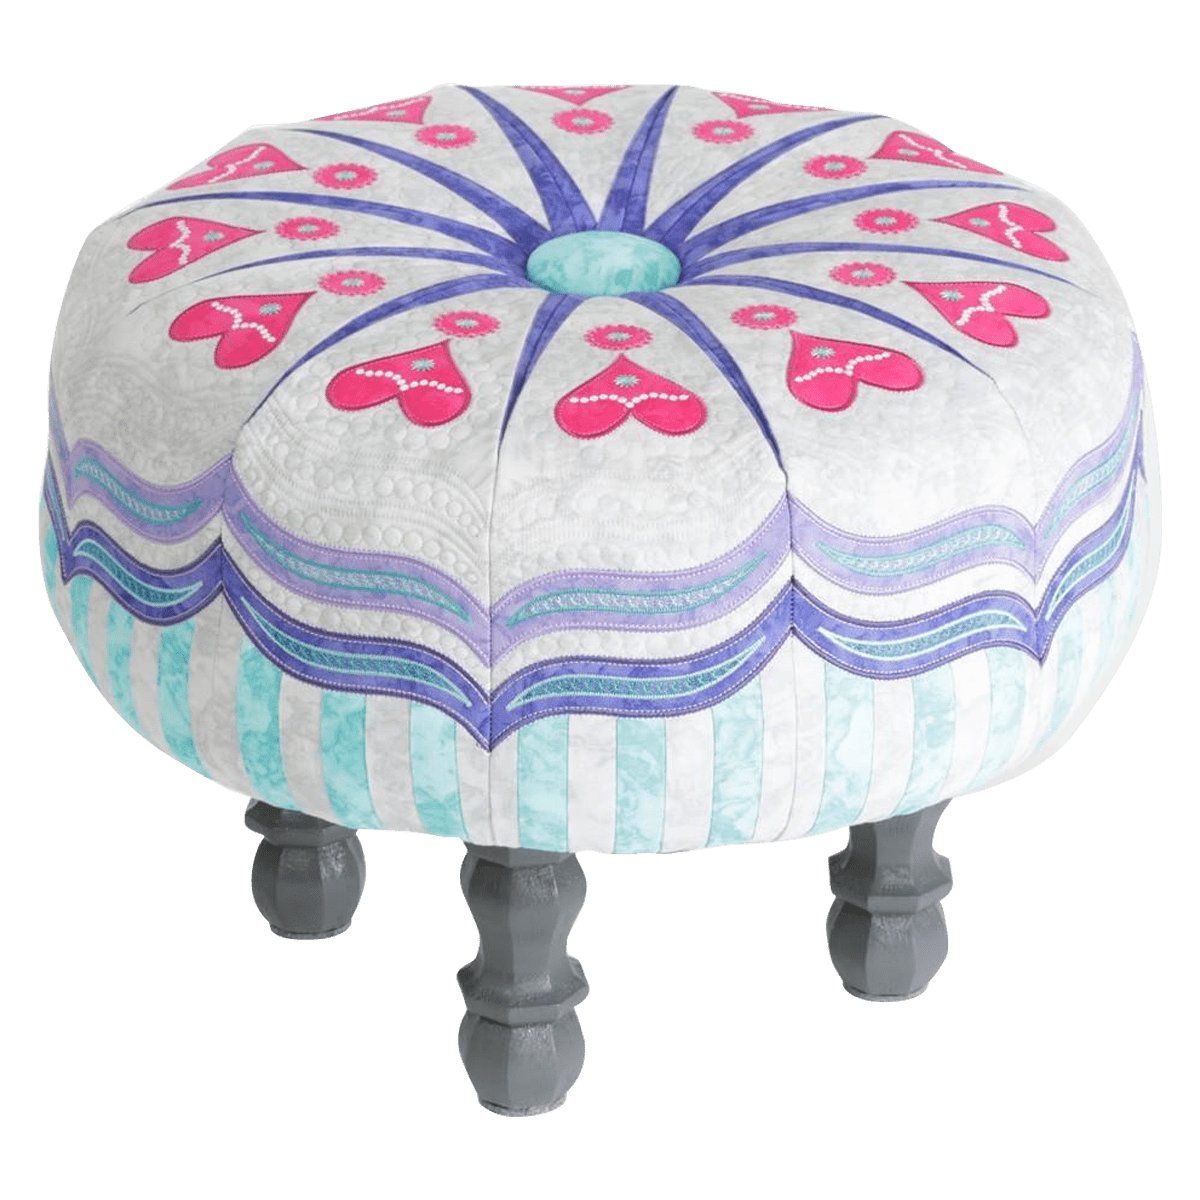 tuffet png transparent free download, tuffet png transparent download, tuffet png transparent free, tuffet png transparent png, tuffet png transparent, png photo, background png, love png, png light,